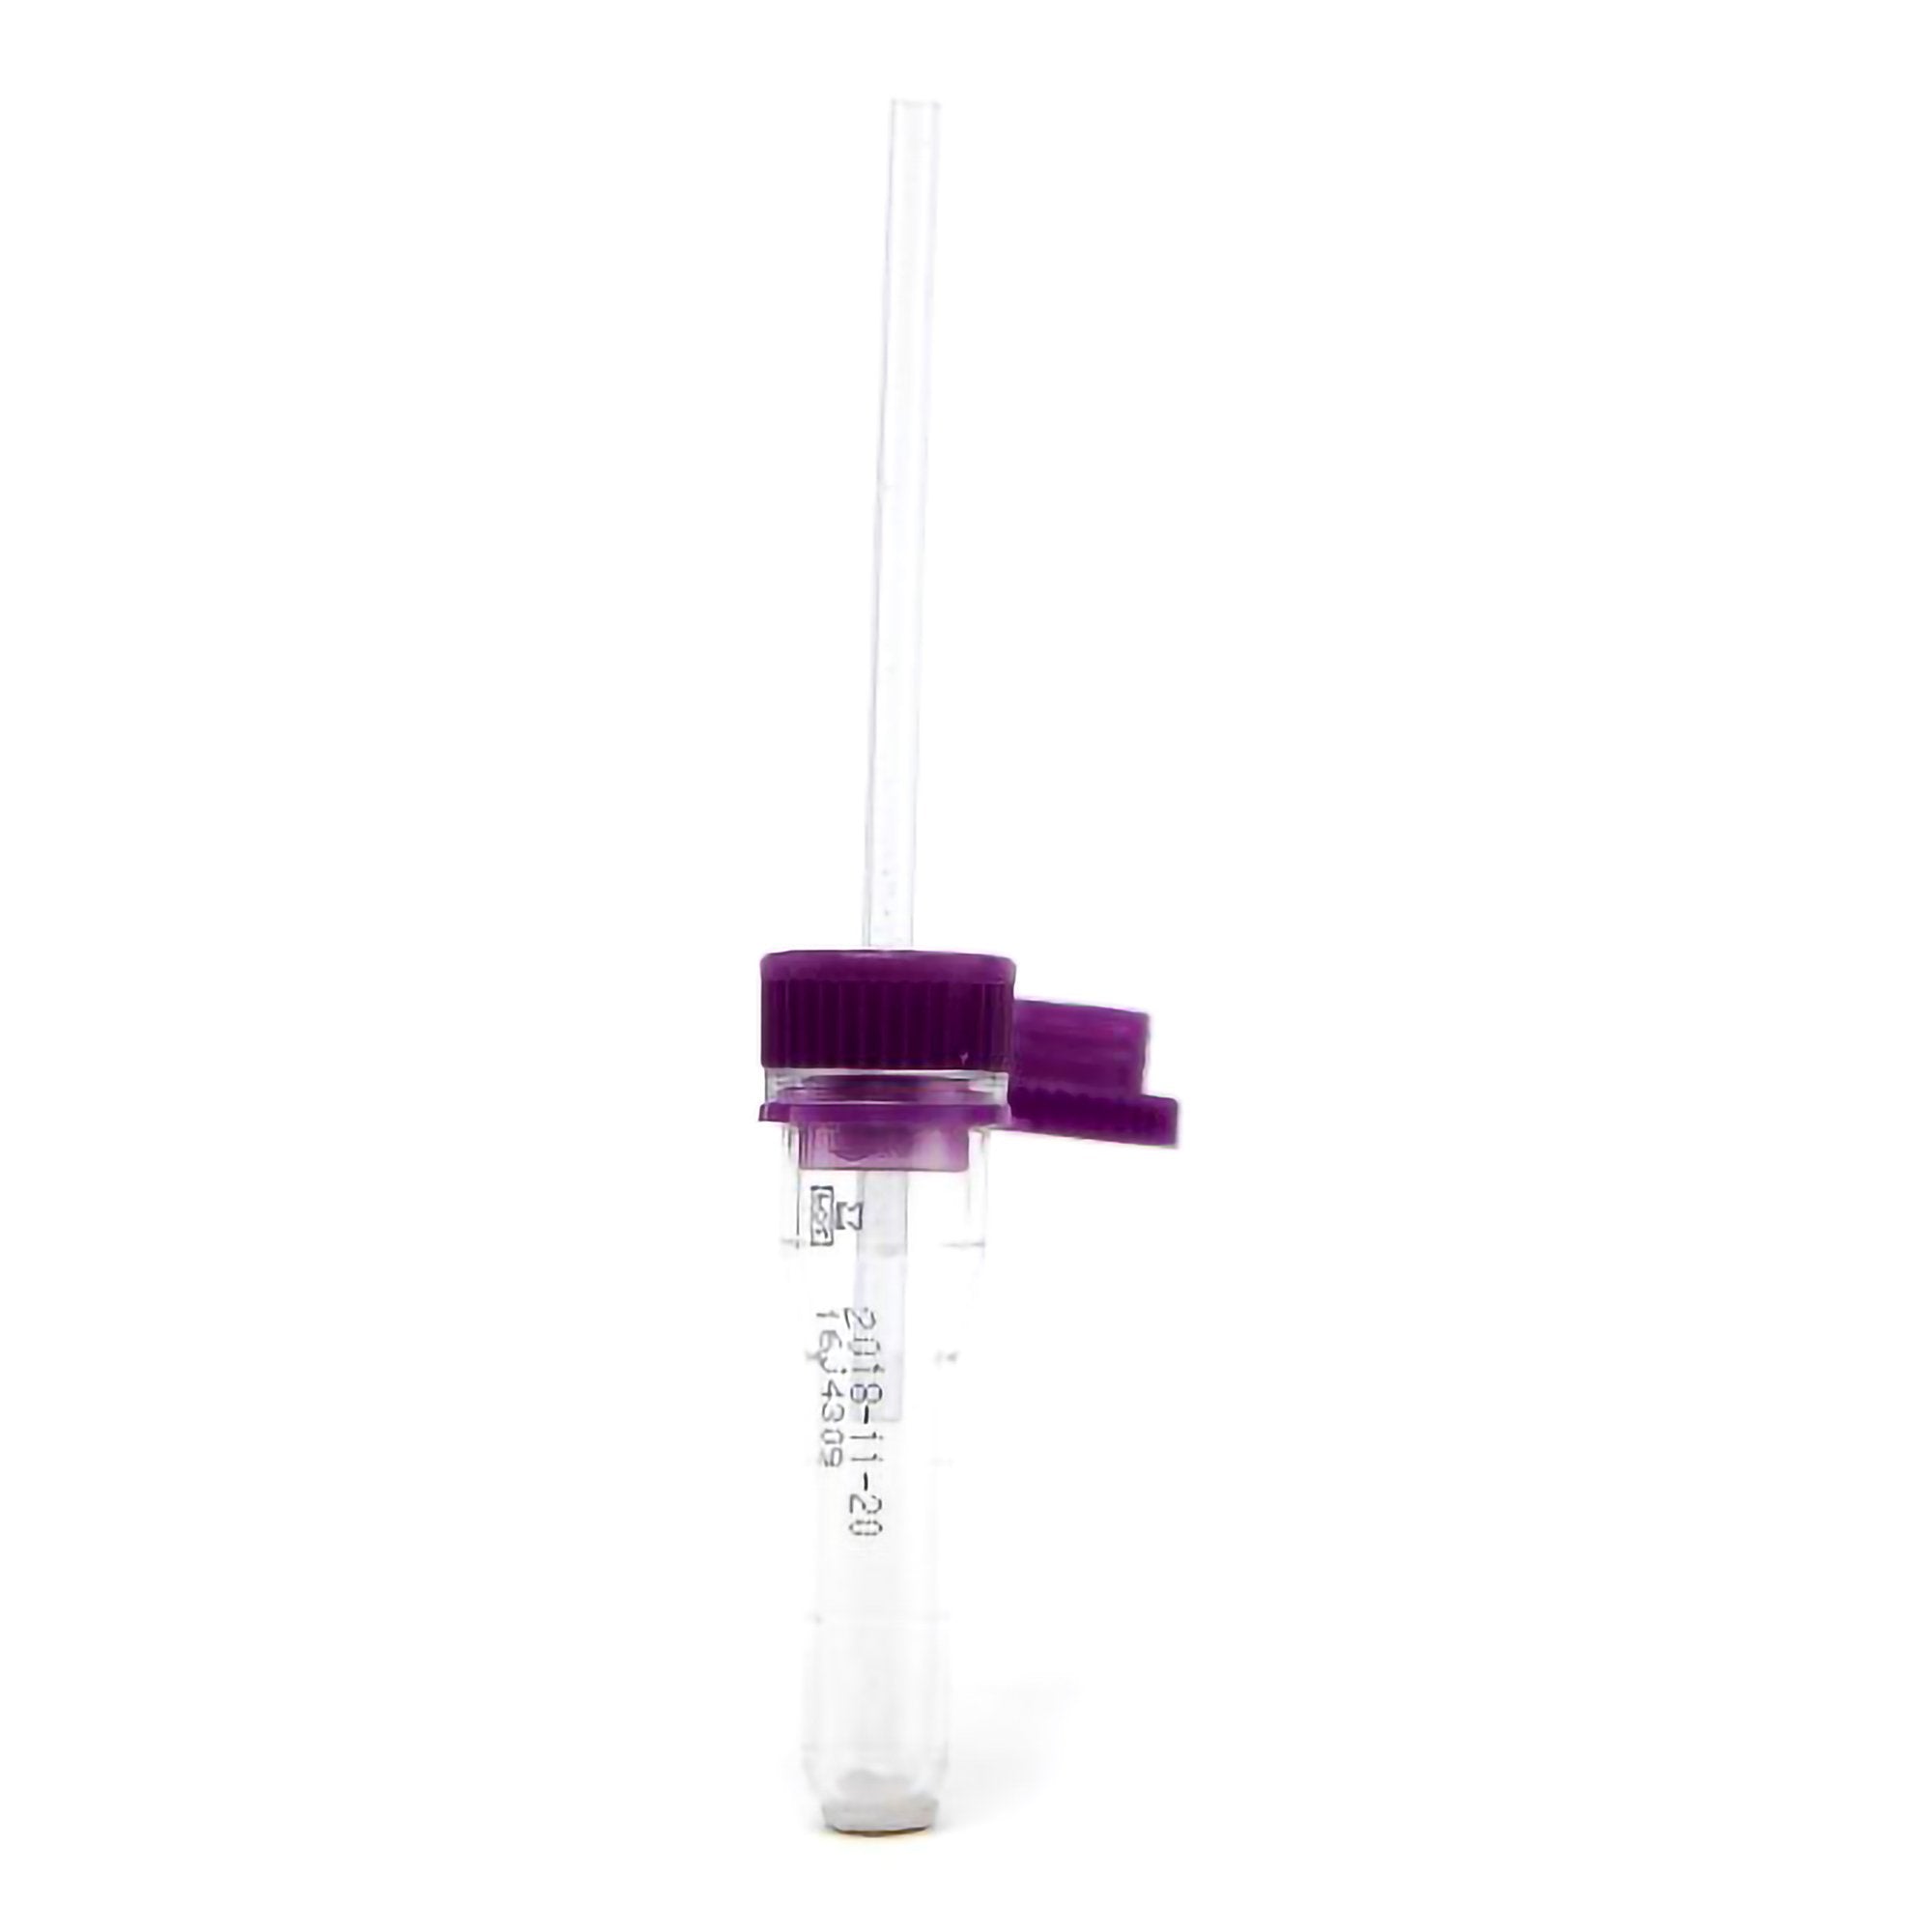 Safe-T-Fill Capillary Blood Collection Tube Whole Blood Tube K2 EDTA Additive 10.8 X 46.6 mm 200 L Purple Pierceable Attached Cap Plastic Tube